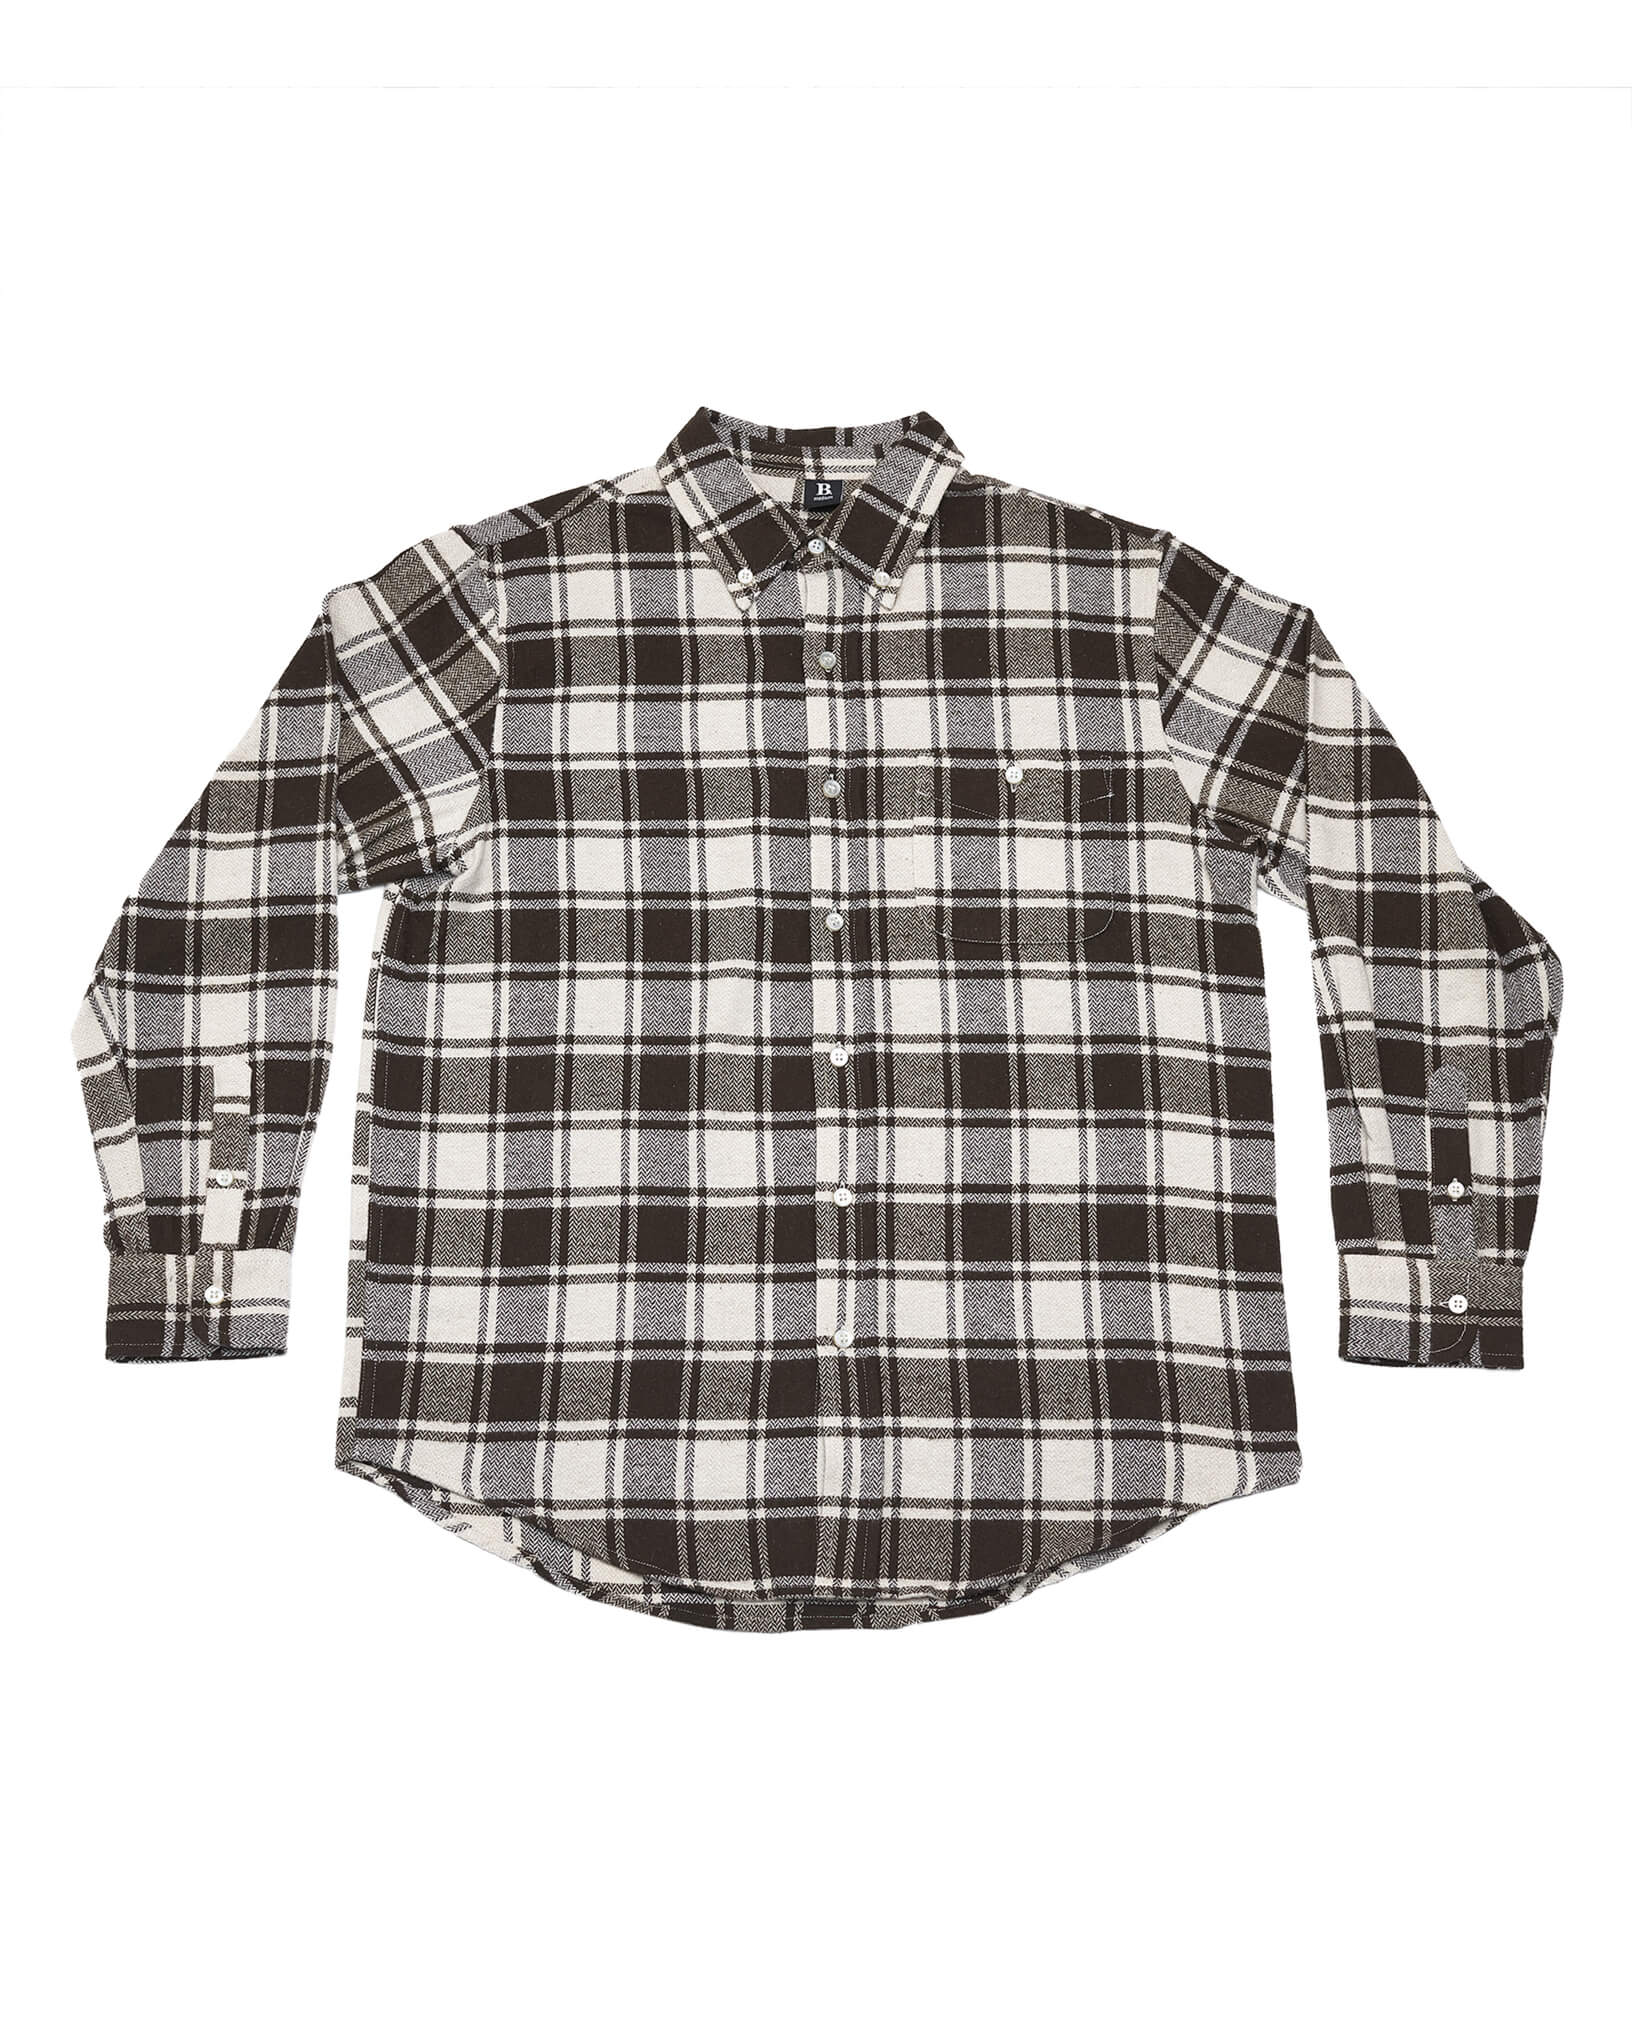 The Traverse Flannel